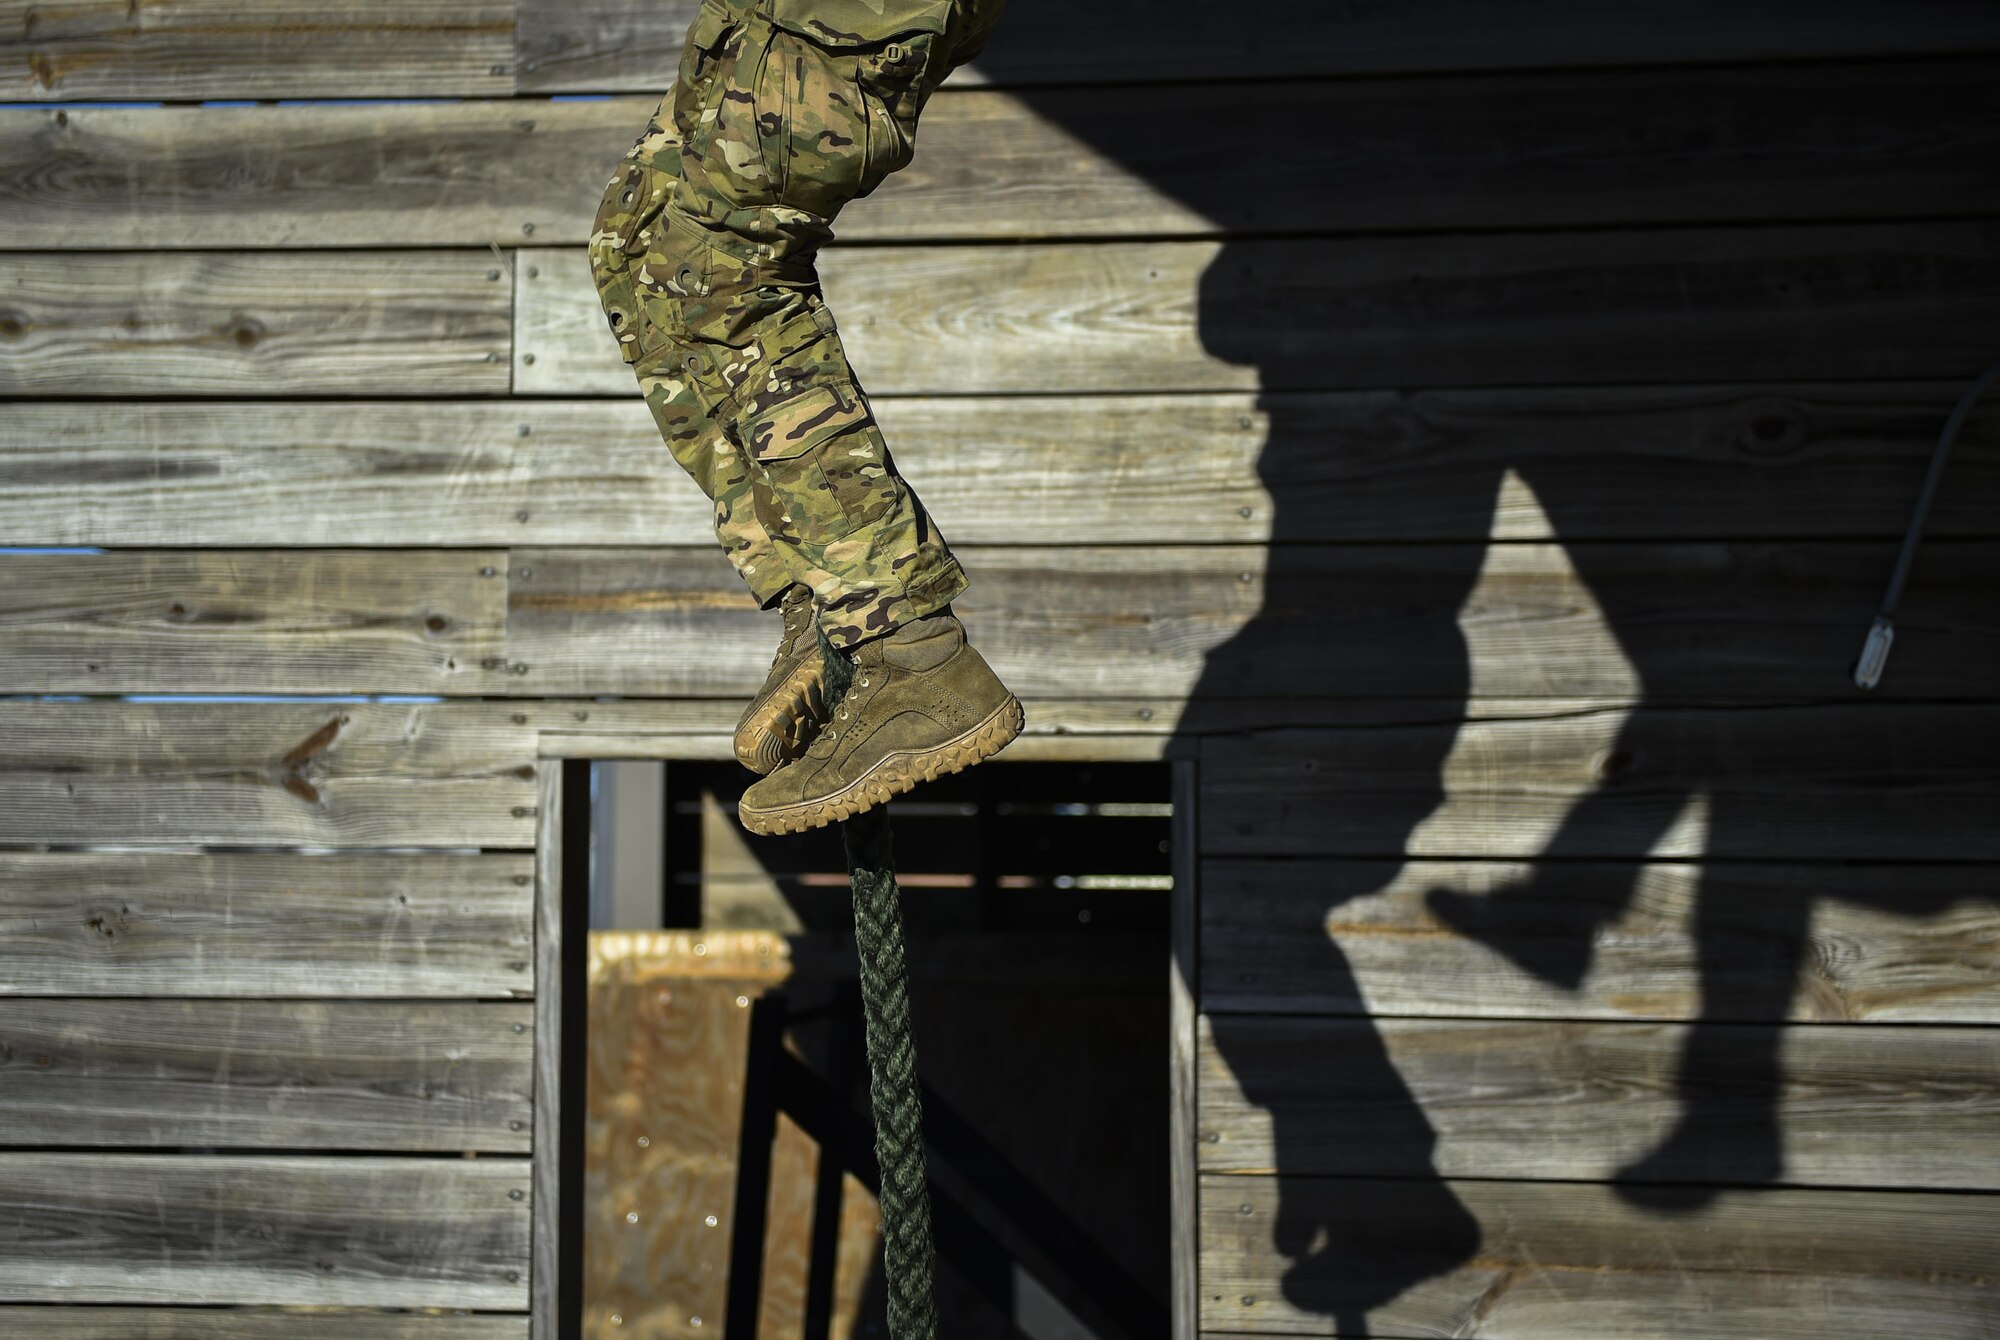 A Soldier with the 1st Battalion, 10th Special Forces Group, fast ropes from a static CV-22 Osprey tiltrotor aircraft frame during training at Hurlburt Field, Fla., March 17, 2017. An instructor with the 1st Special Operations Support Squadron Operational Support Joint Office trained Soldiers on proper fast roping techniques for special operations missions. (U.S. Air Force photo by Airman 1st Class Joseph Pick)